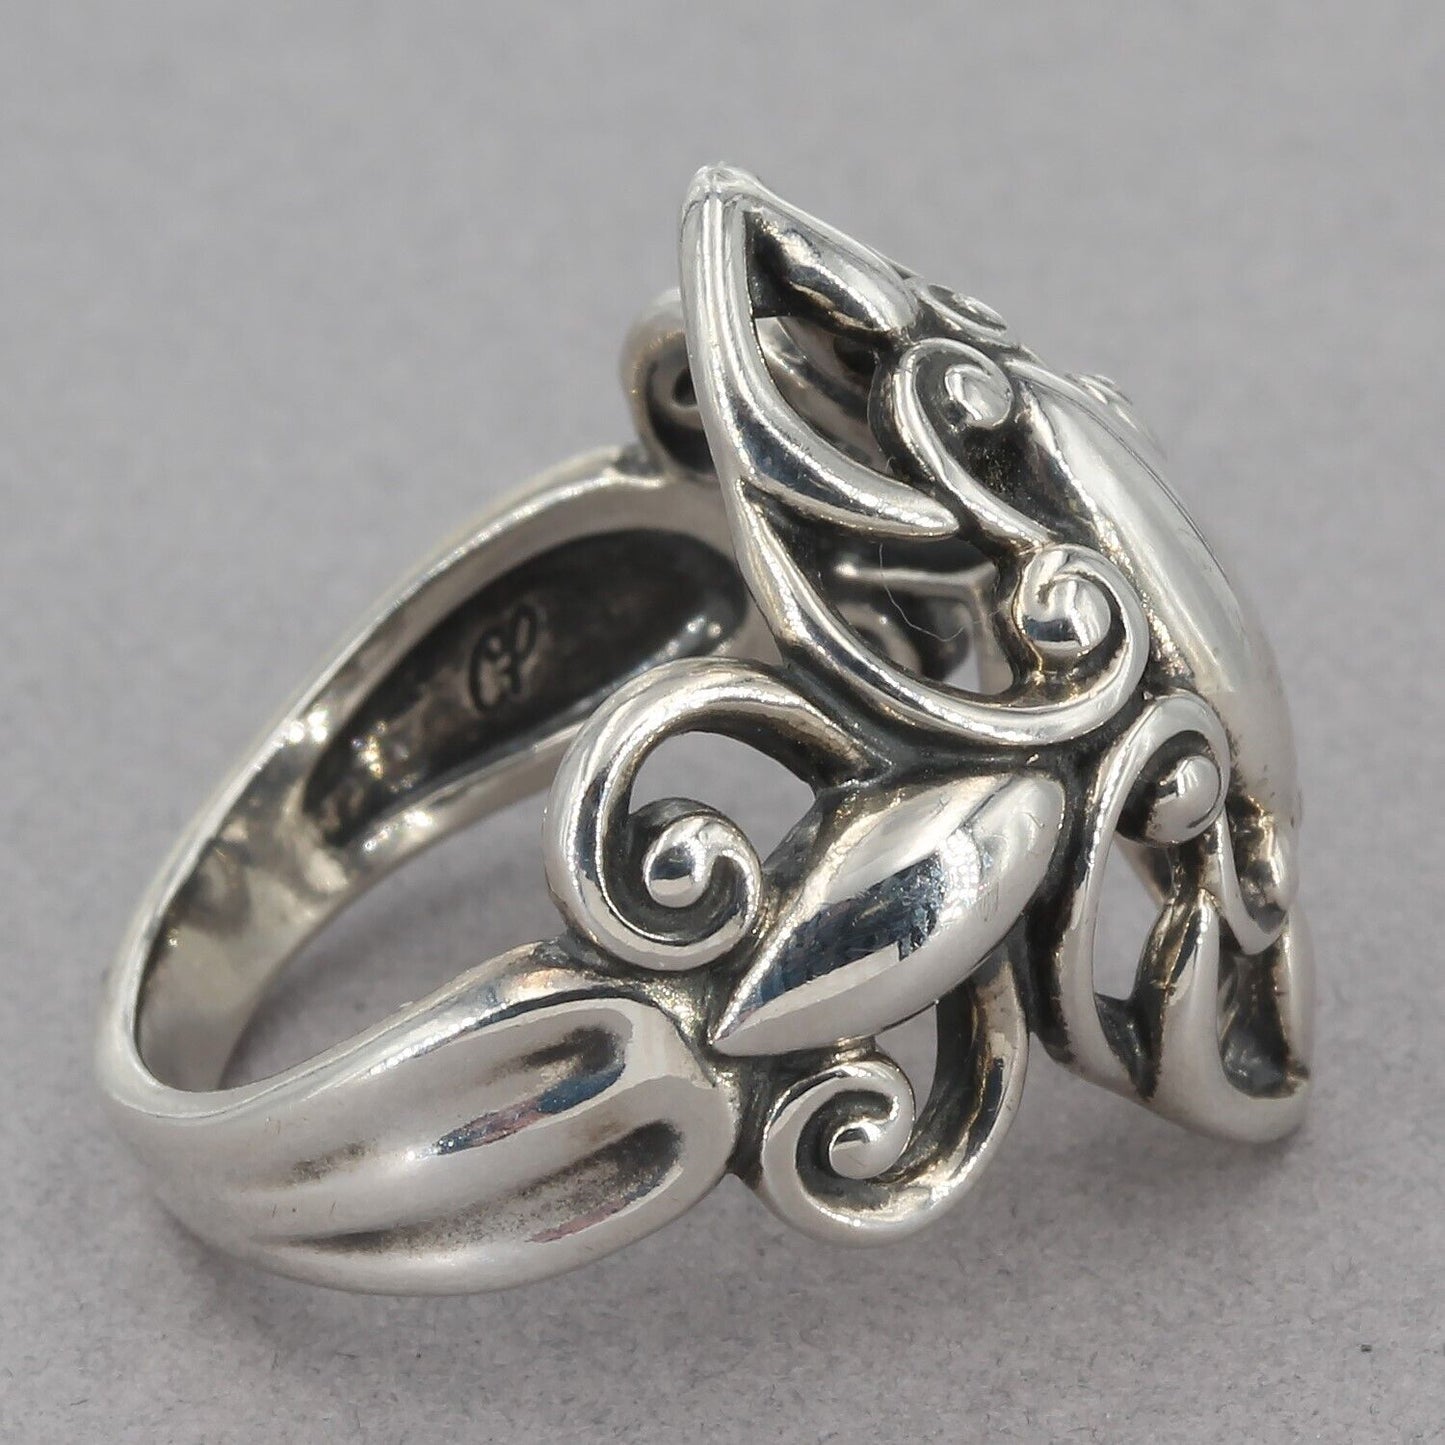 Carolyn Pollack Relios Sterling Silver Southwestern Scroll Ring Size 7